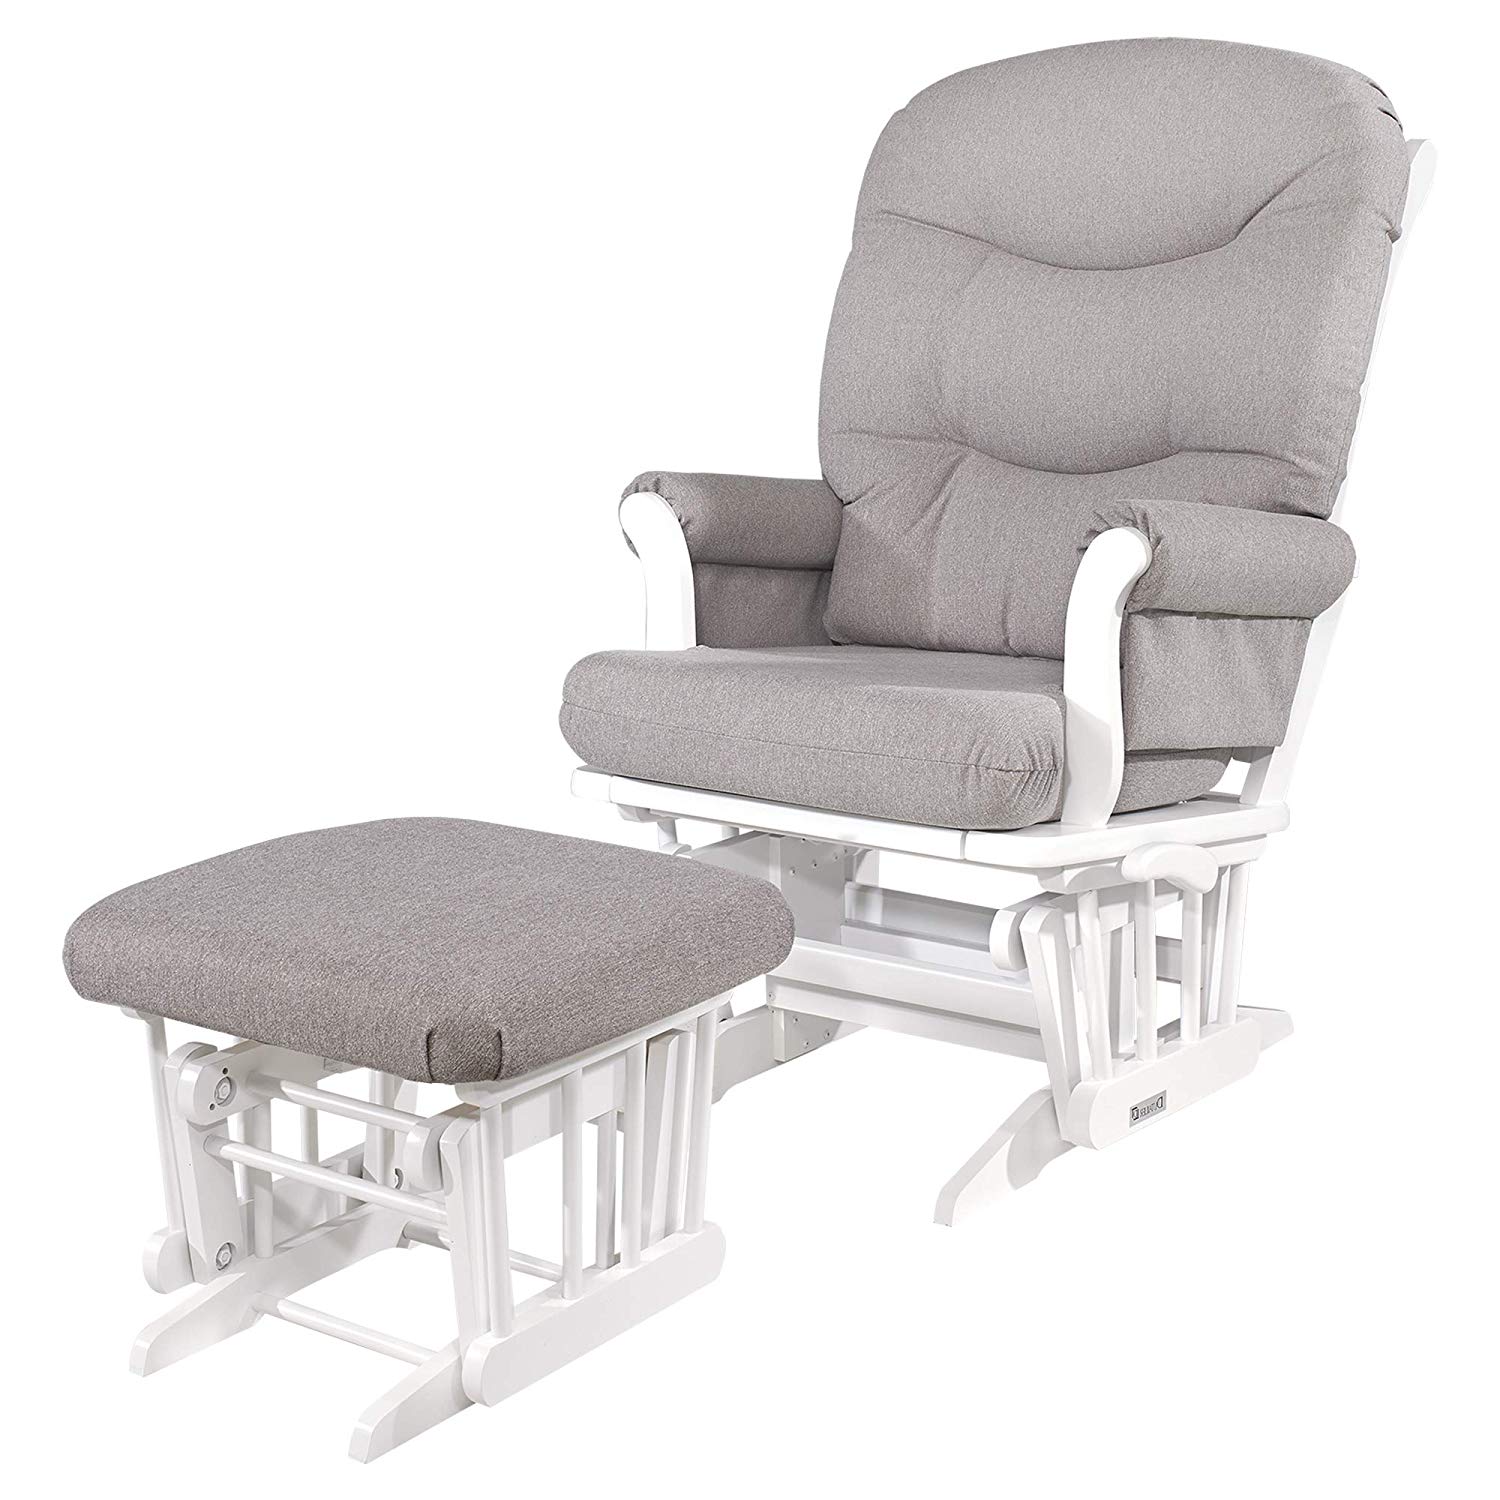 Dutailer Ottoman and recliner for pregnant woman